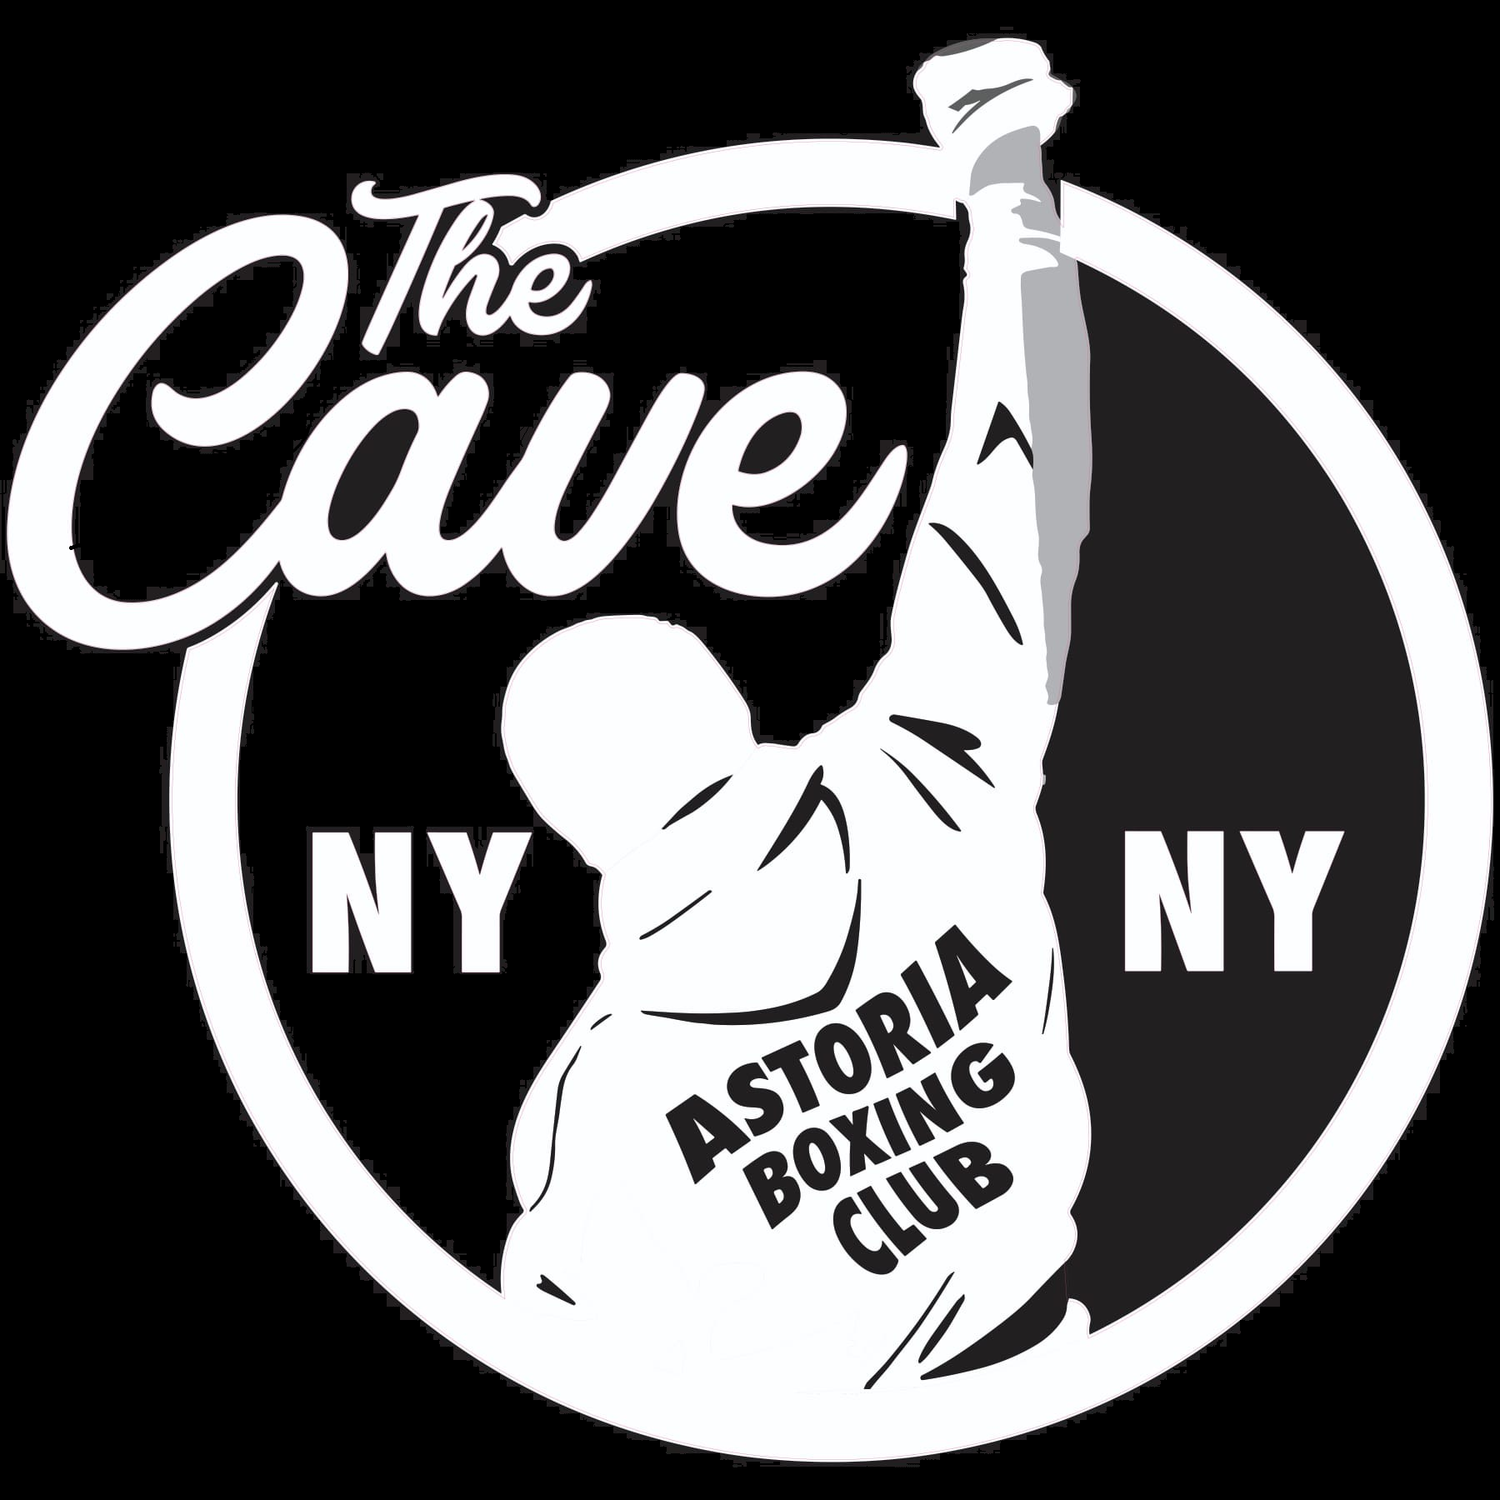 The Cave Astoria Boxing Gym